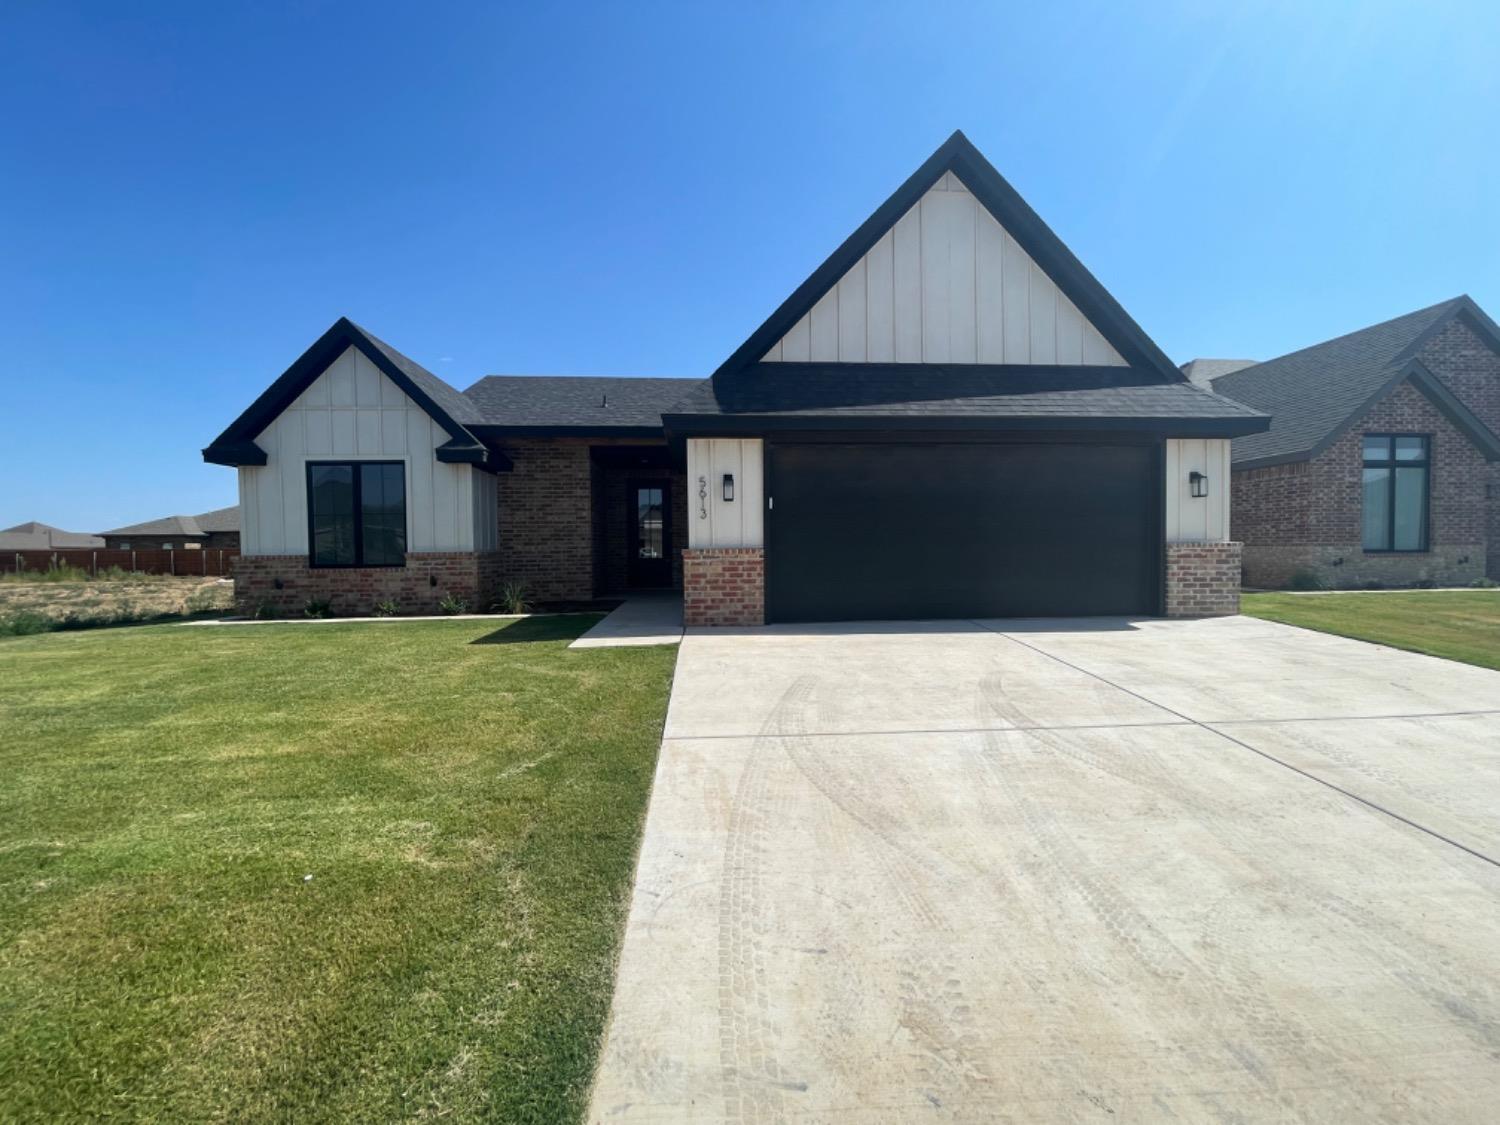 PRICE REDUCED!! Another beautiful Signature Home by Clearview! This 3 bed/ 3 bath home is located in Stonewood Estates off of 119th and Frankford. This home features a modern farmhouse design with black accents throughout! Find your favorite Realtor and come take a look at this awesome floor-plan!